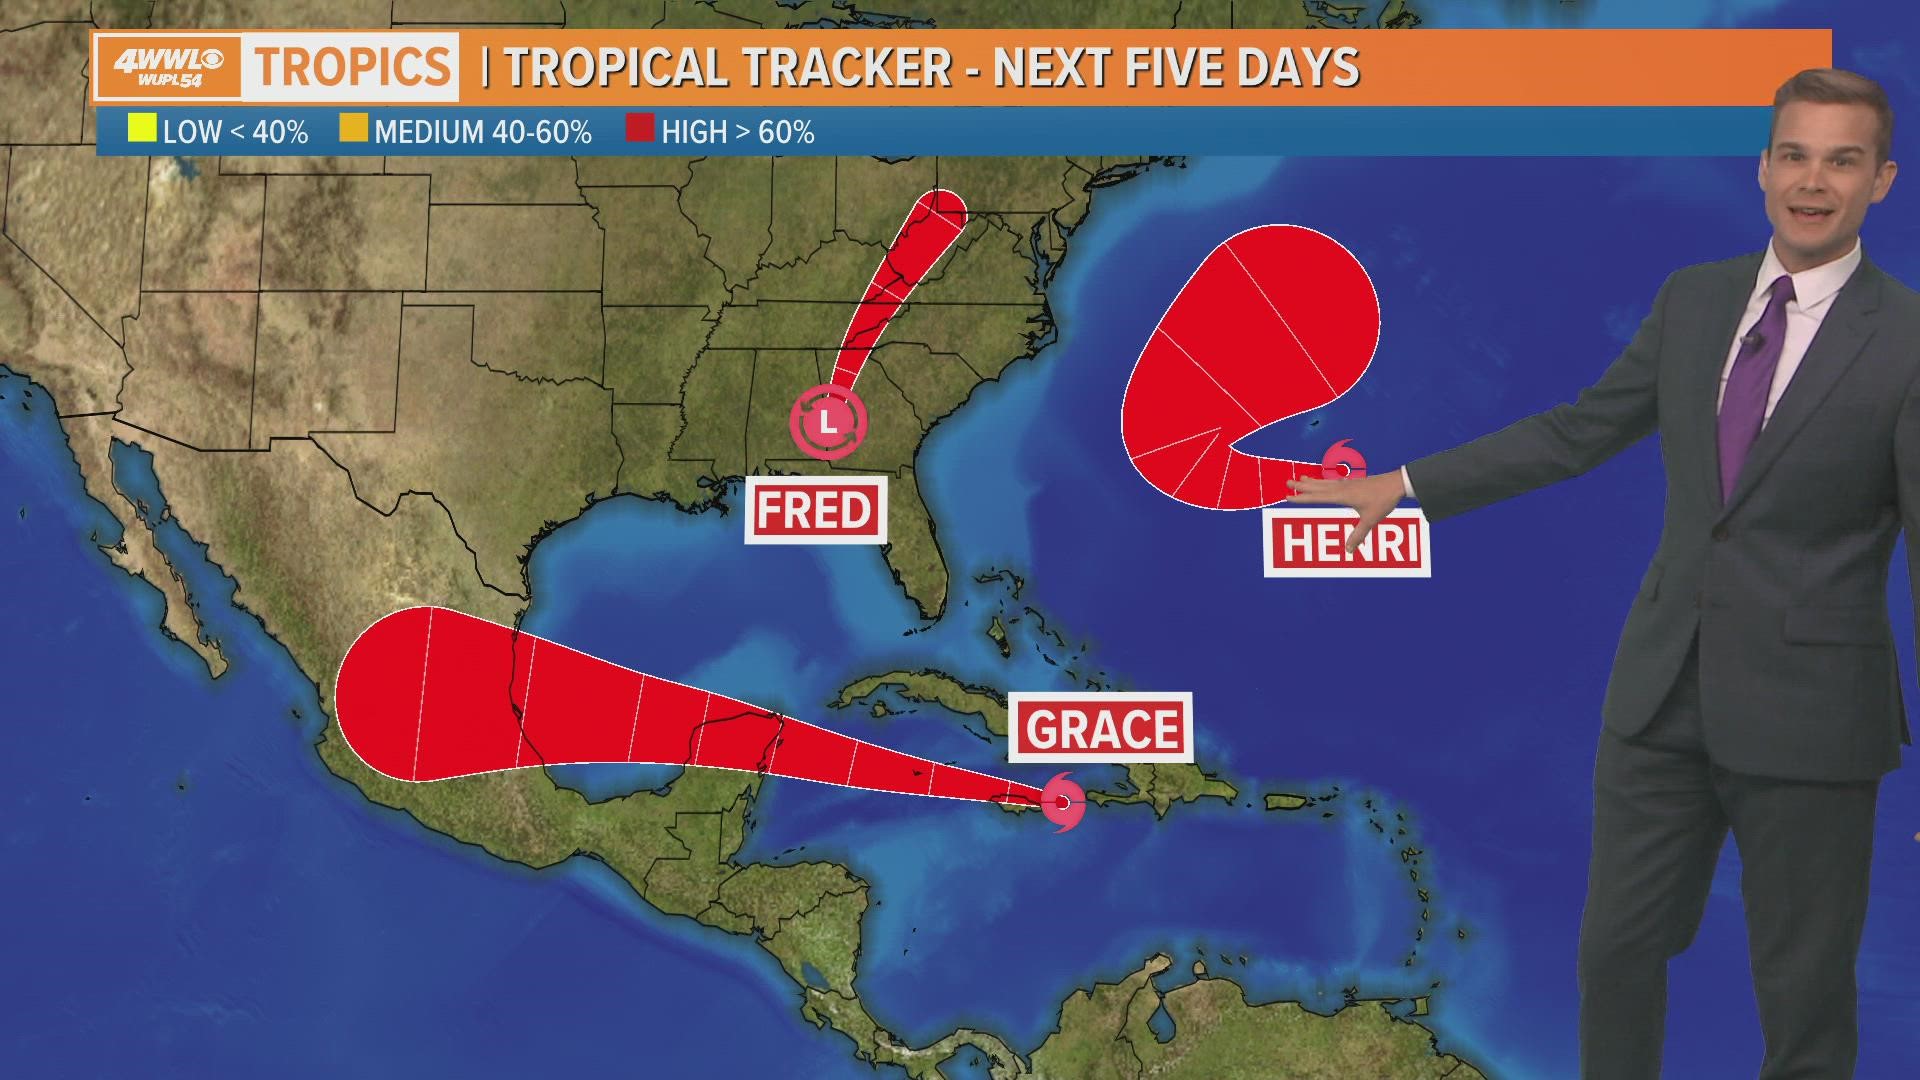 Tuesday Morning Tropical Update: Tropical Storm Grace heads west, Henri to be a fish storm